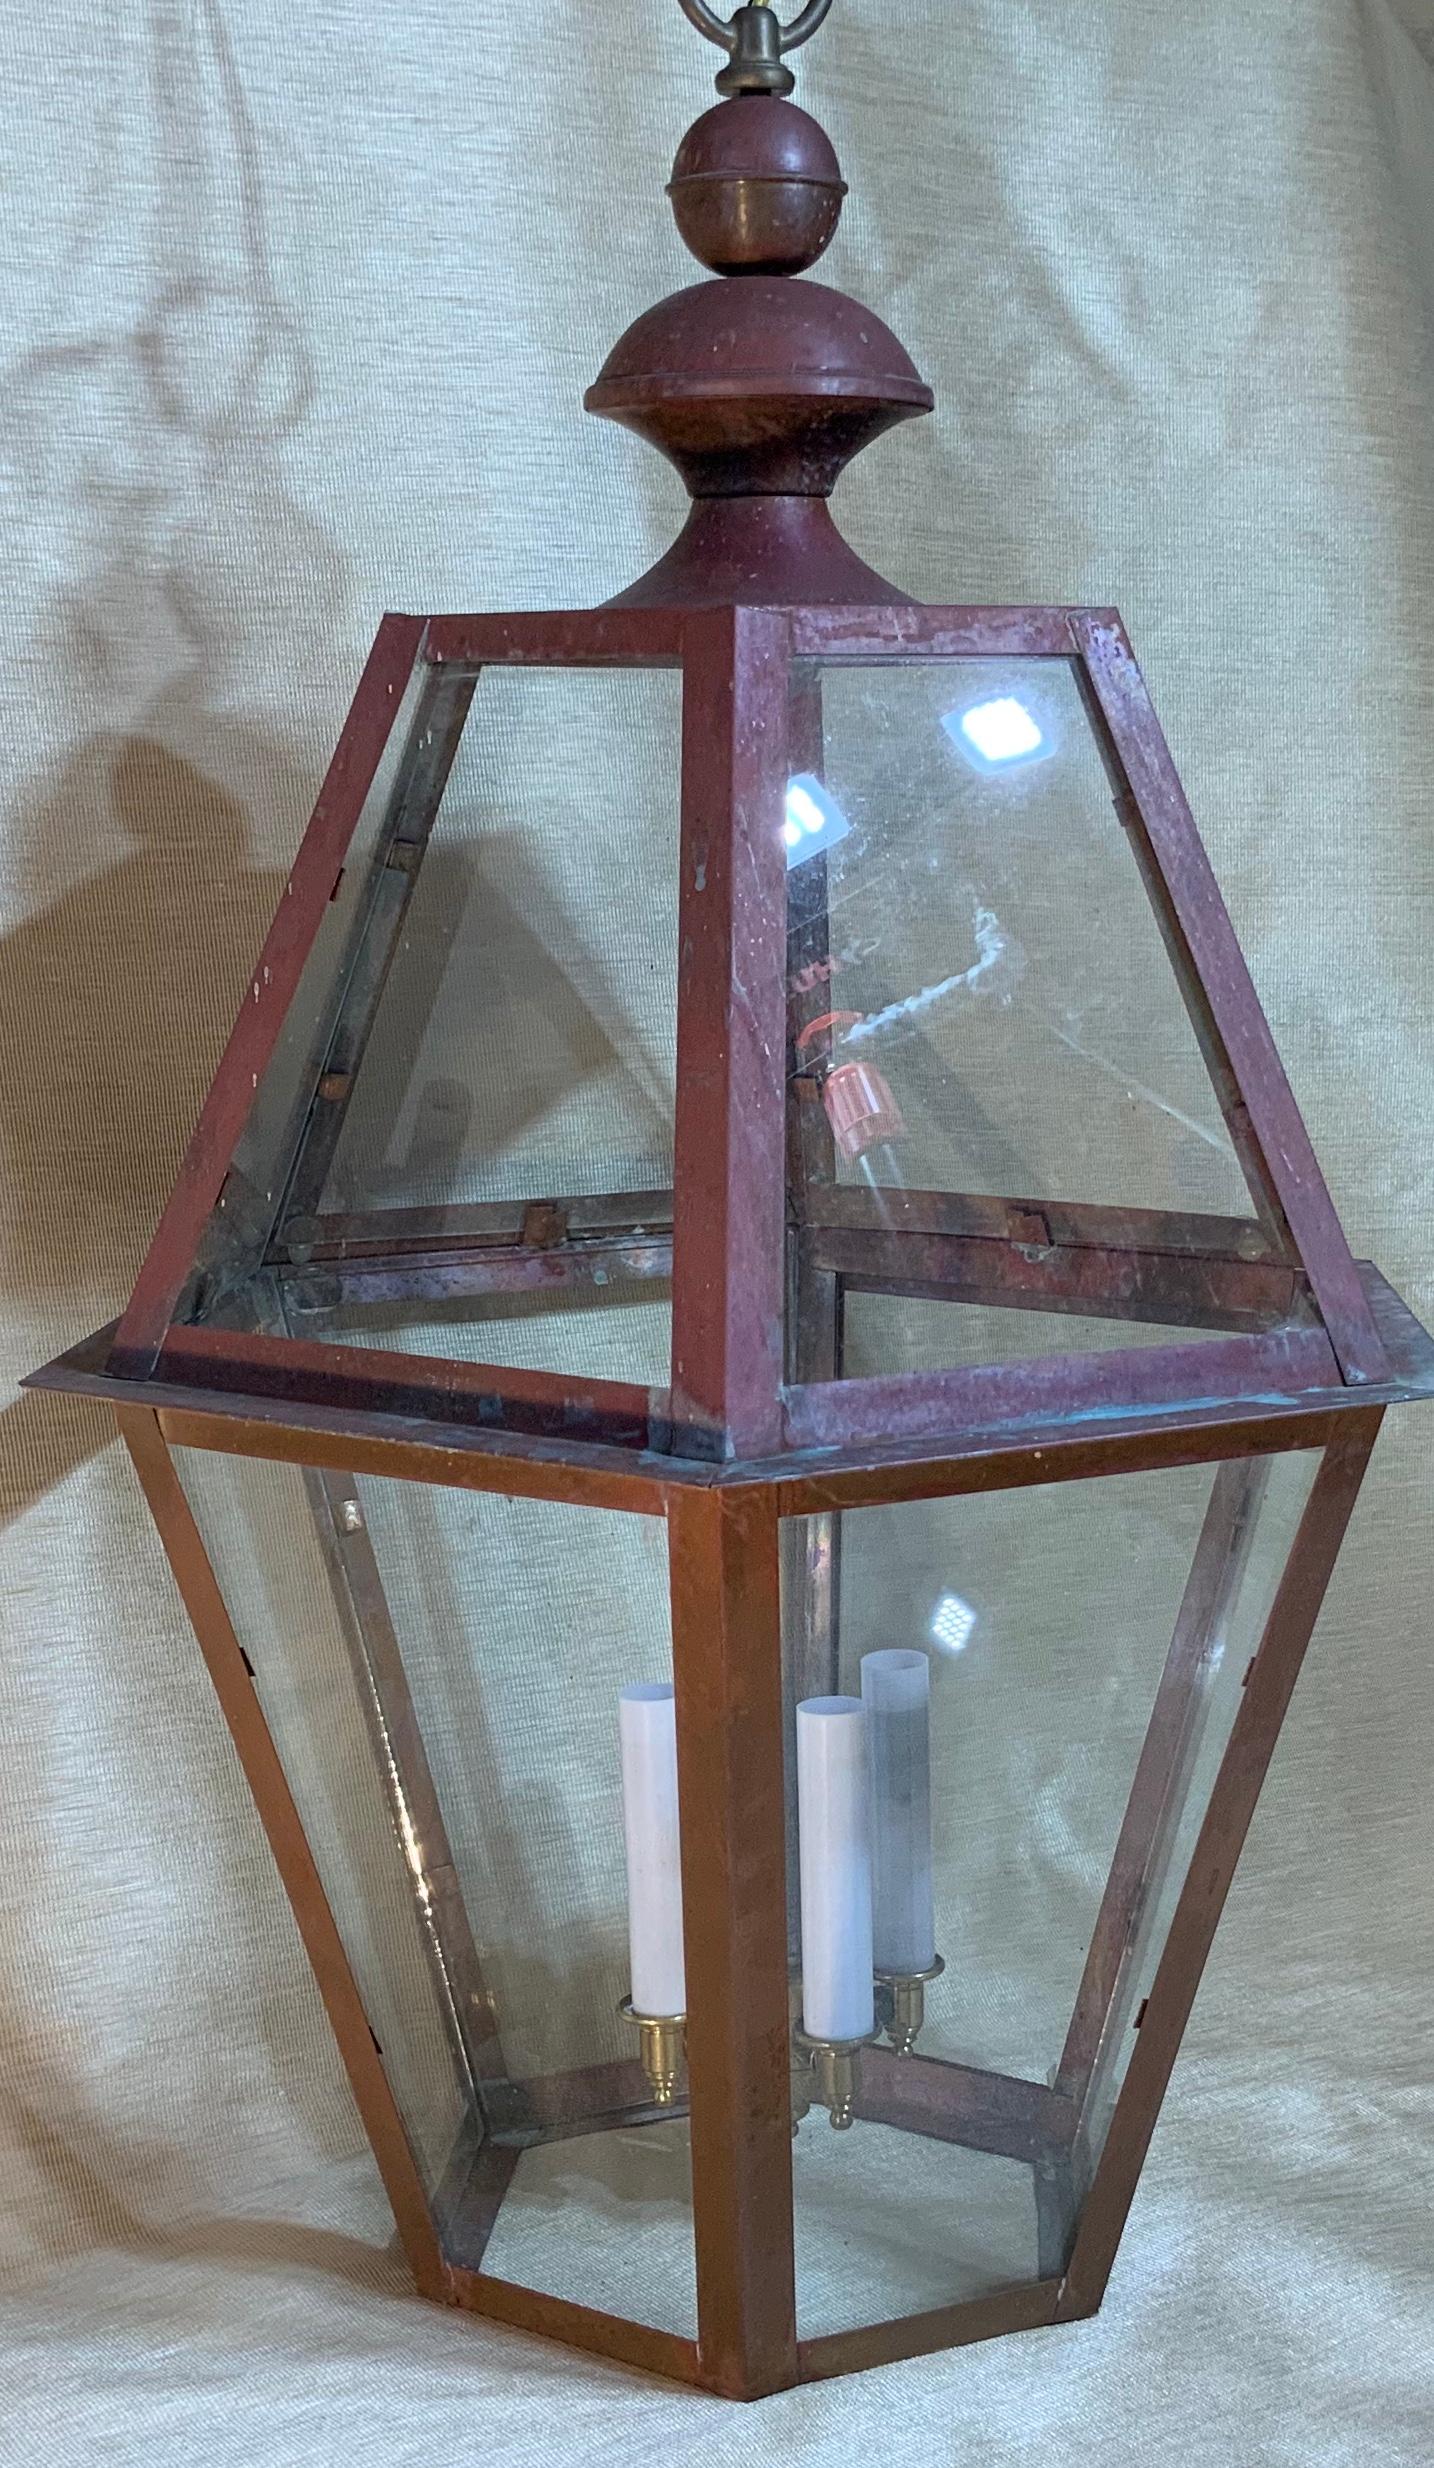 Exceptional six side hanging lantern made of handcrafted solid copper. Brass stem with four 60/watt lights, suitable for wet location
Up to US code UL approved, great look indoor outdoor. Copper canopy and chain included.